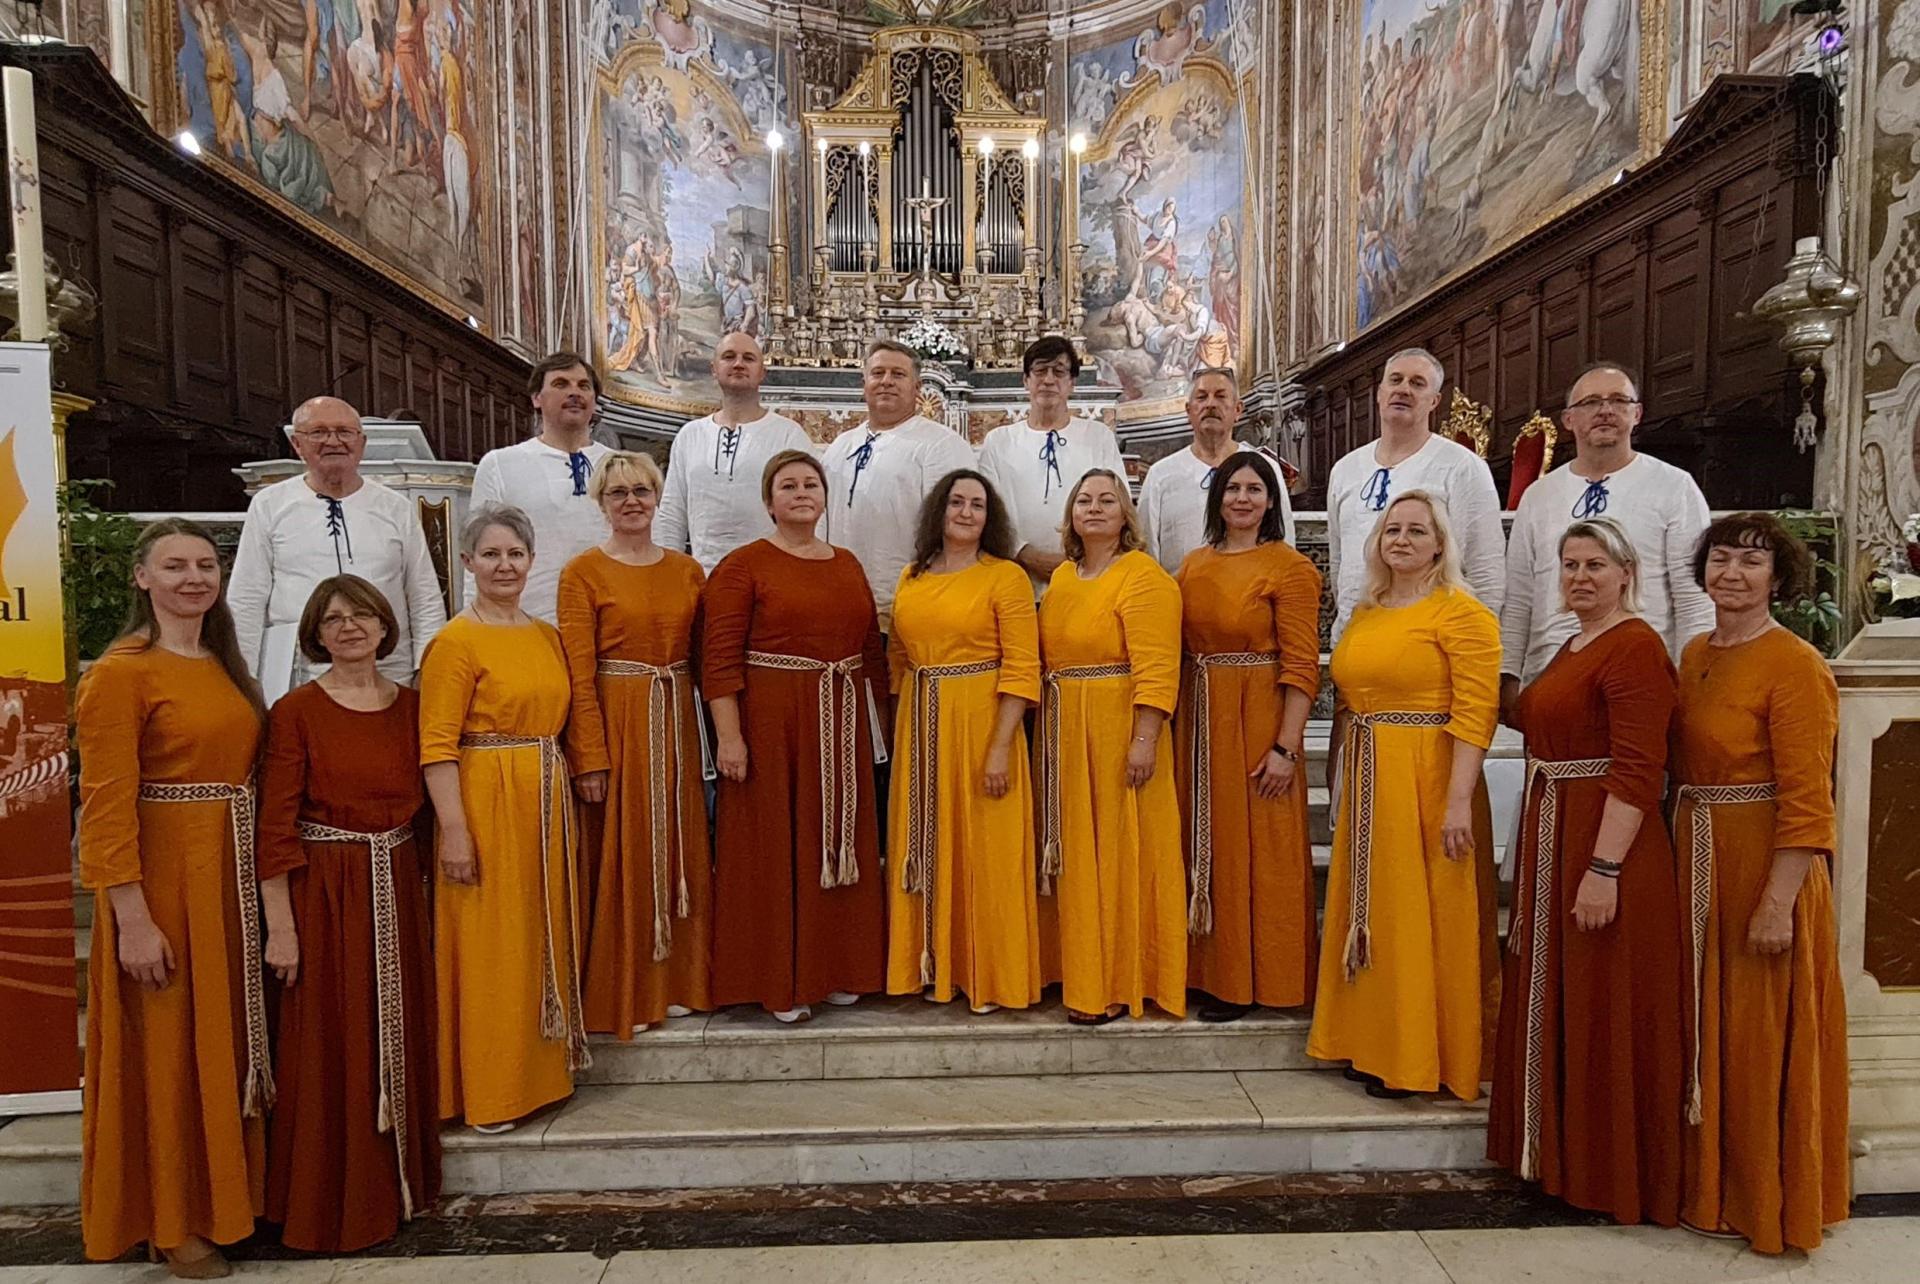 Con Moto Chamber Choir from Lithuania, one of the international choirs participating in the festival.